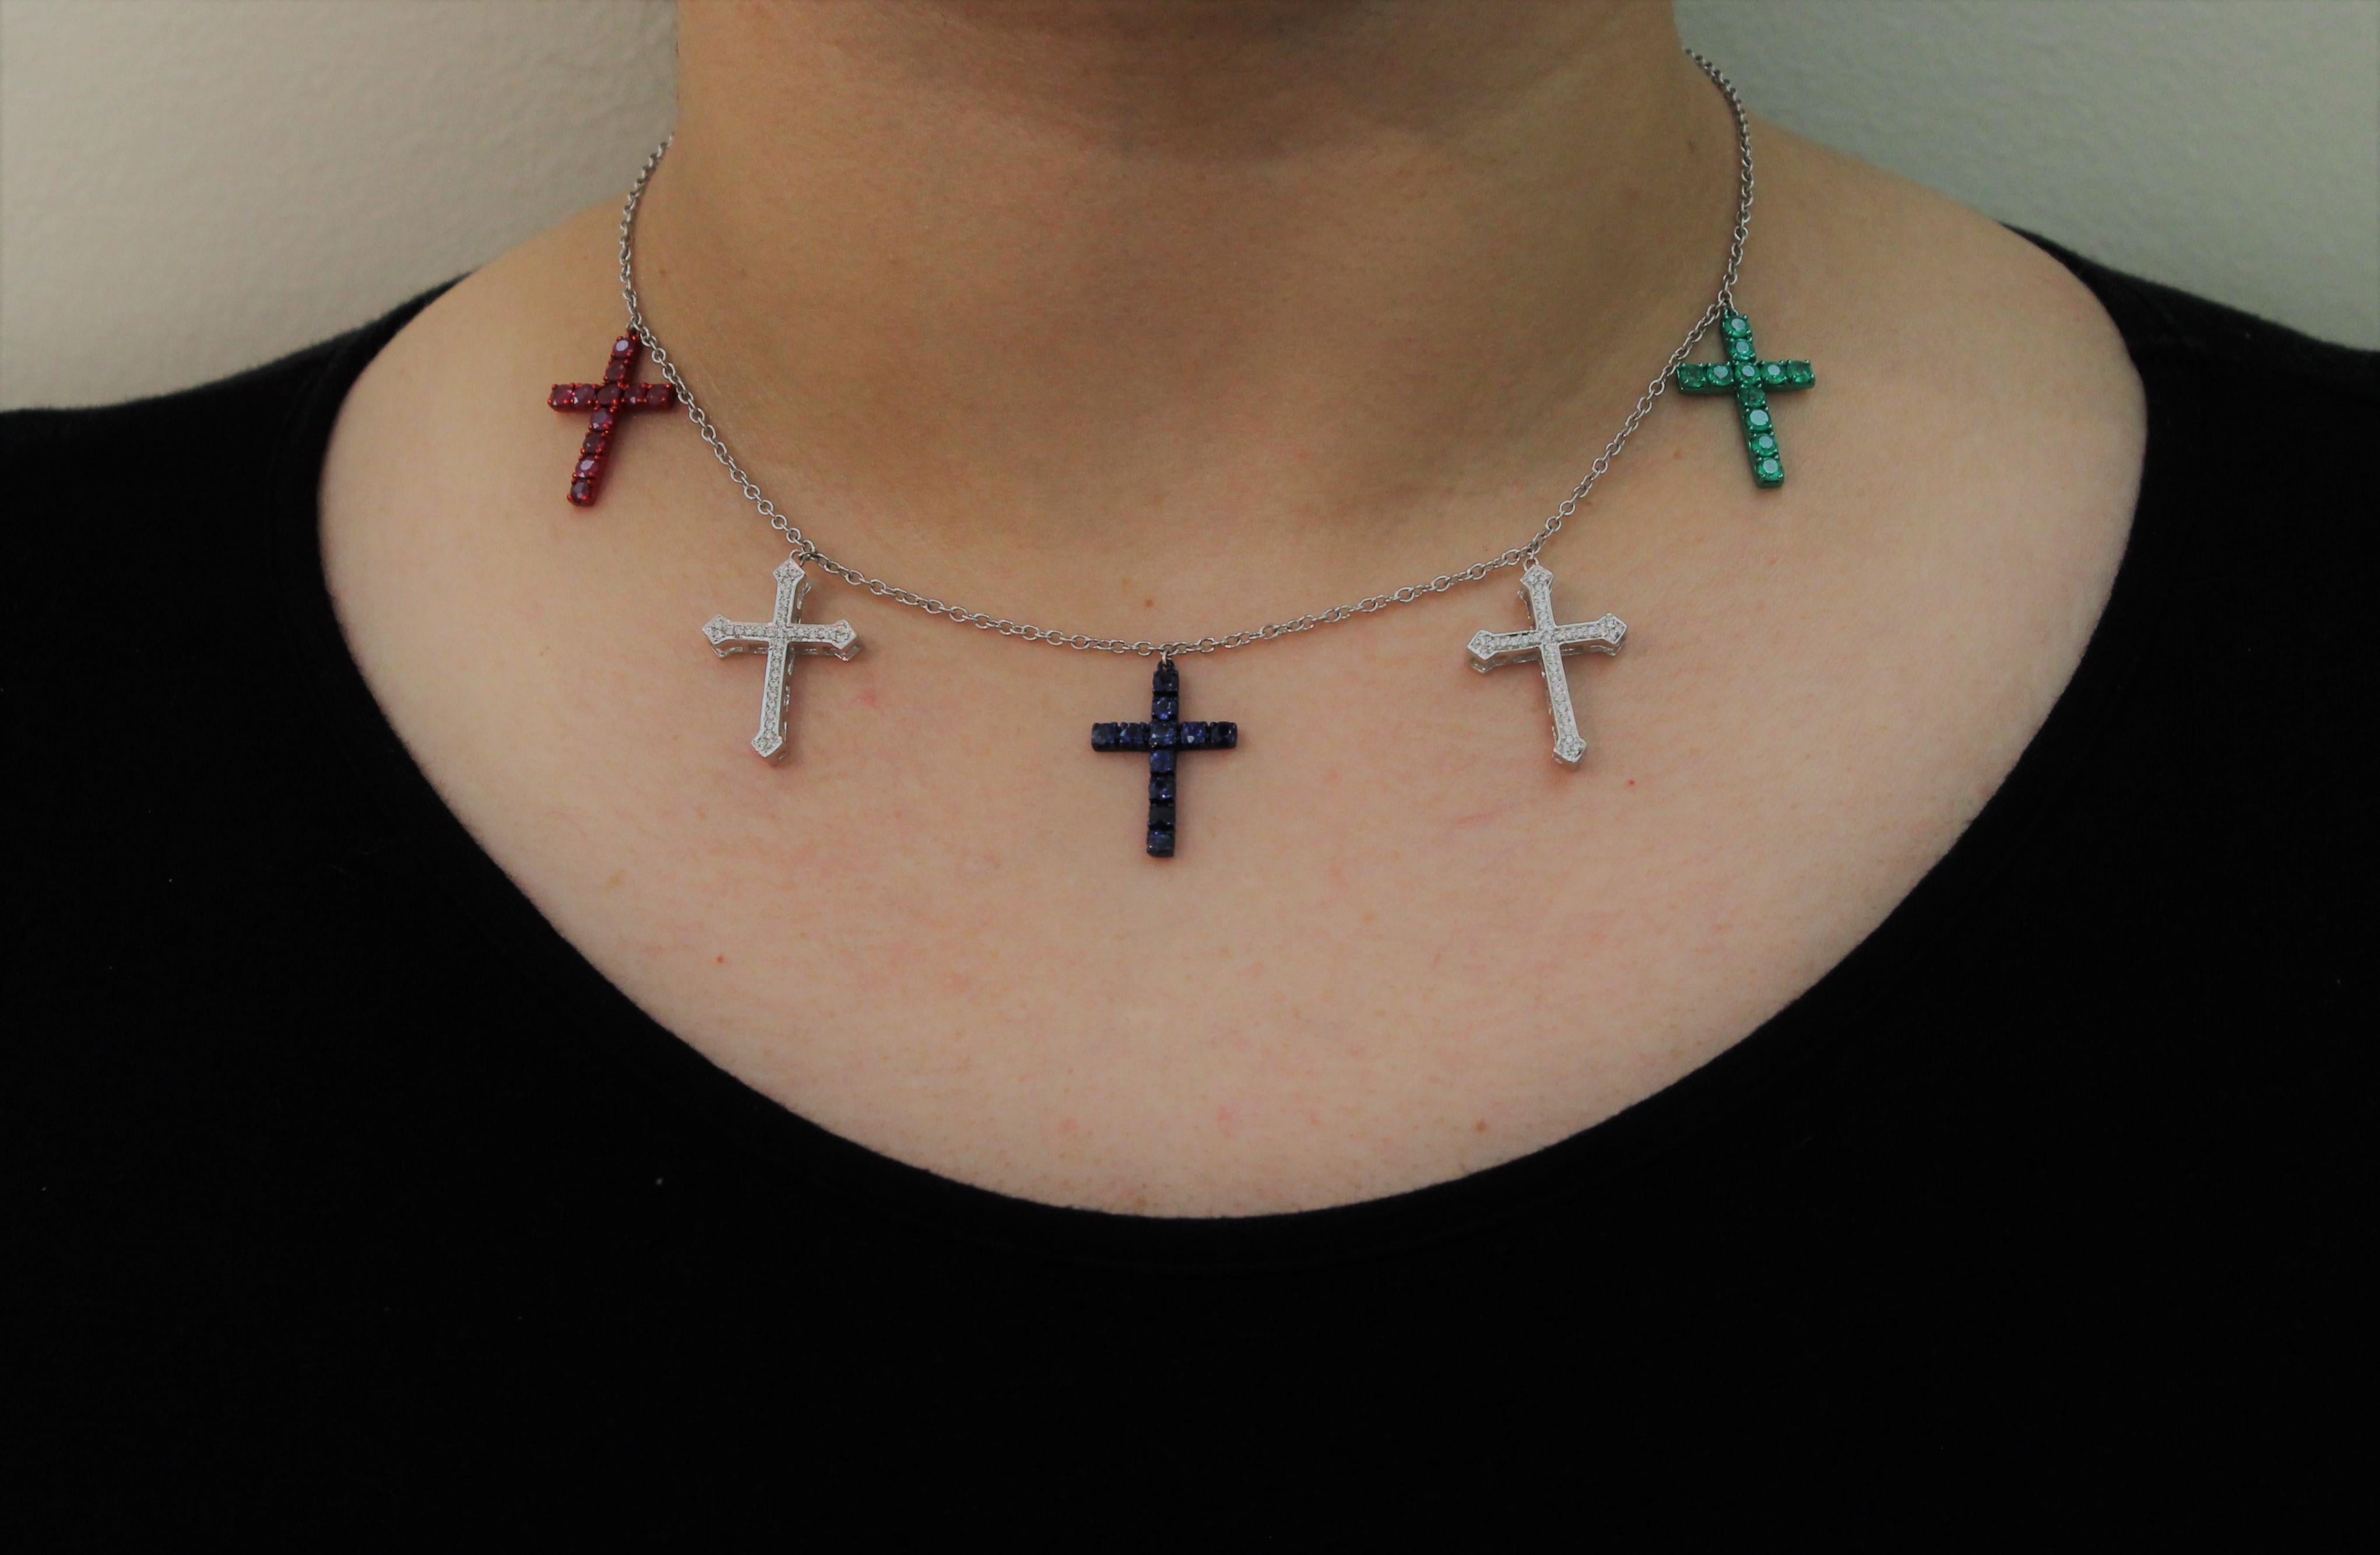 Charms Necklace with different color Cross-Charms:
1 Green E-Coated Emerald Cross is composed of 1.32 Carat Emerald,
1 Red E-Coated Ruby Cross is composed of 1.32 Carat Ruby,
1 Blue E-Coated Sapphire Cross is composed of  1.16 Carat Sapphire,
2